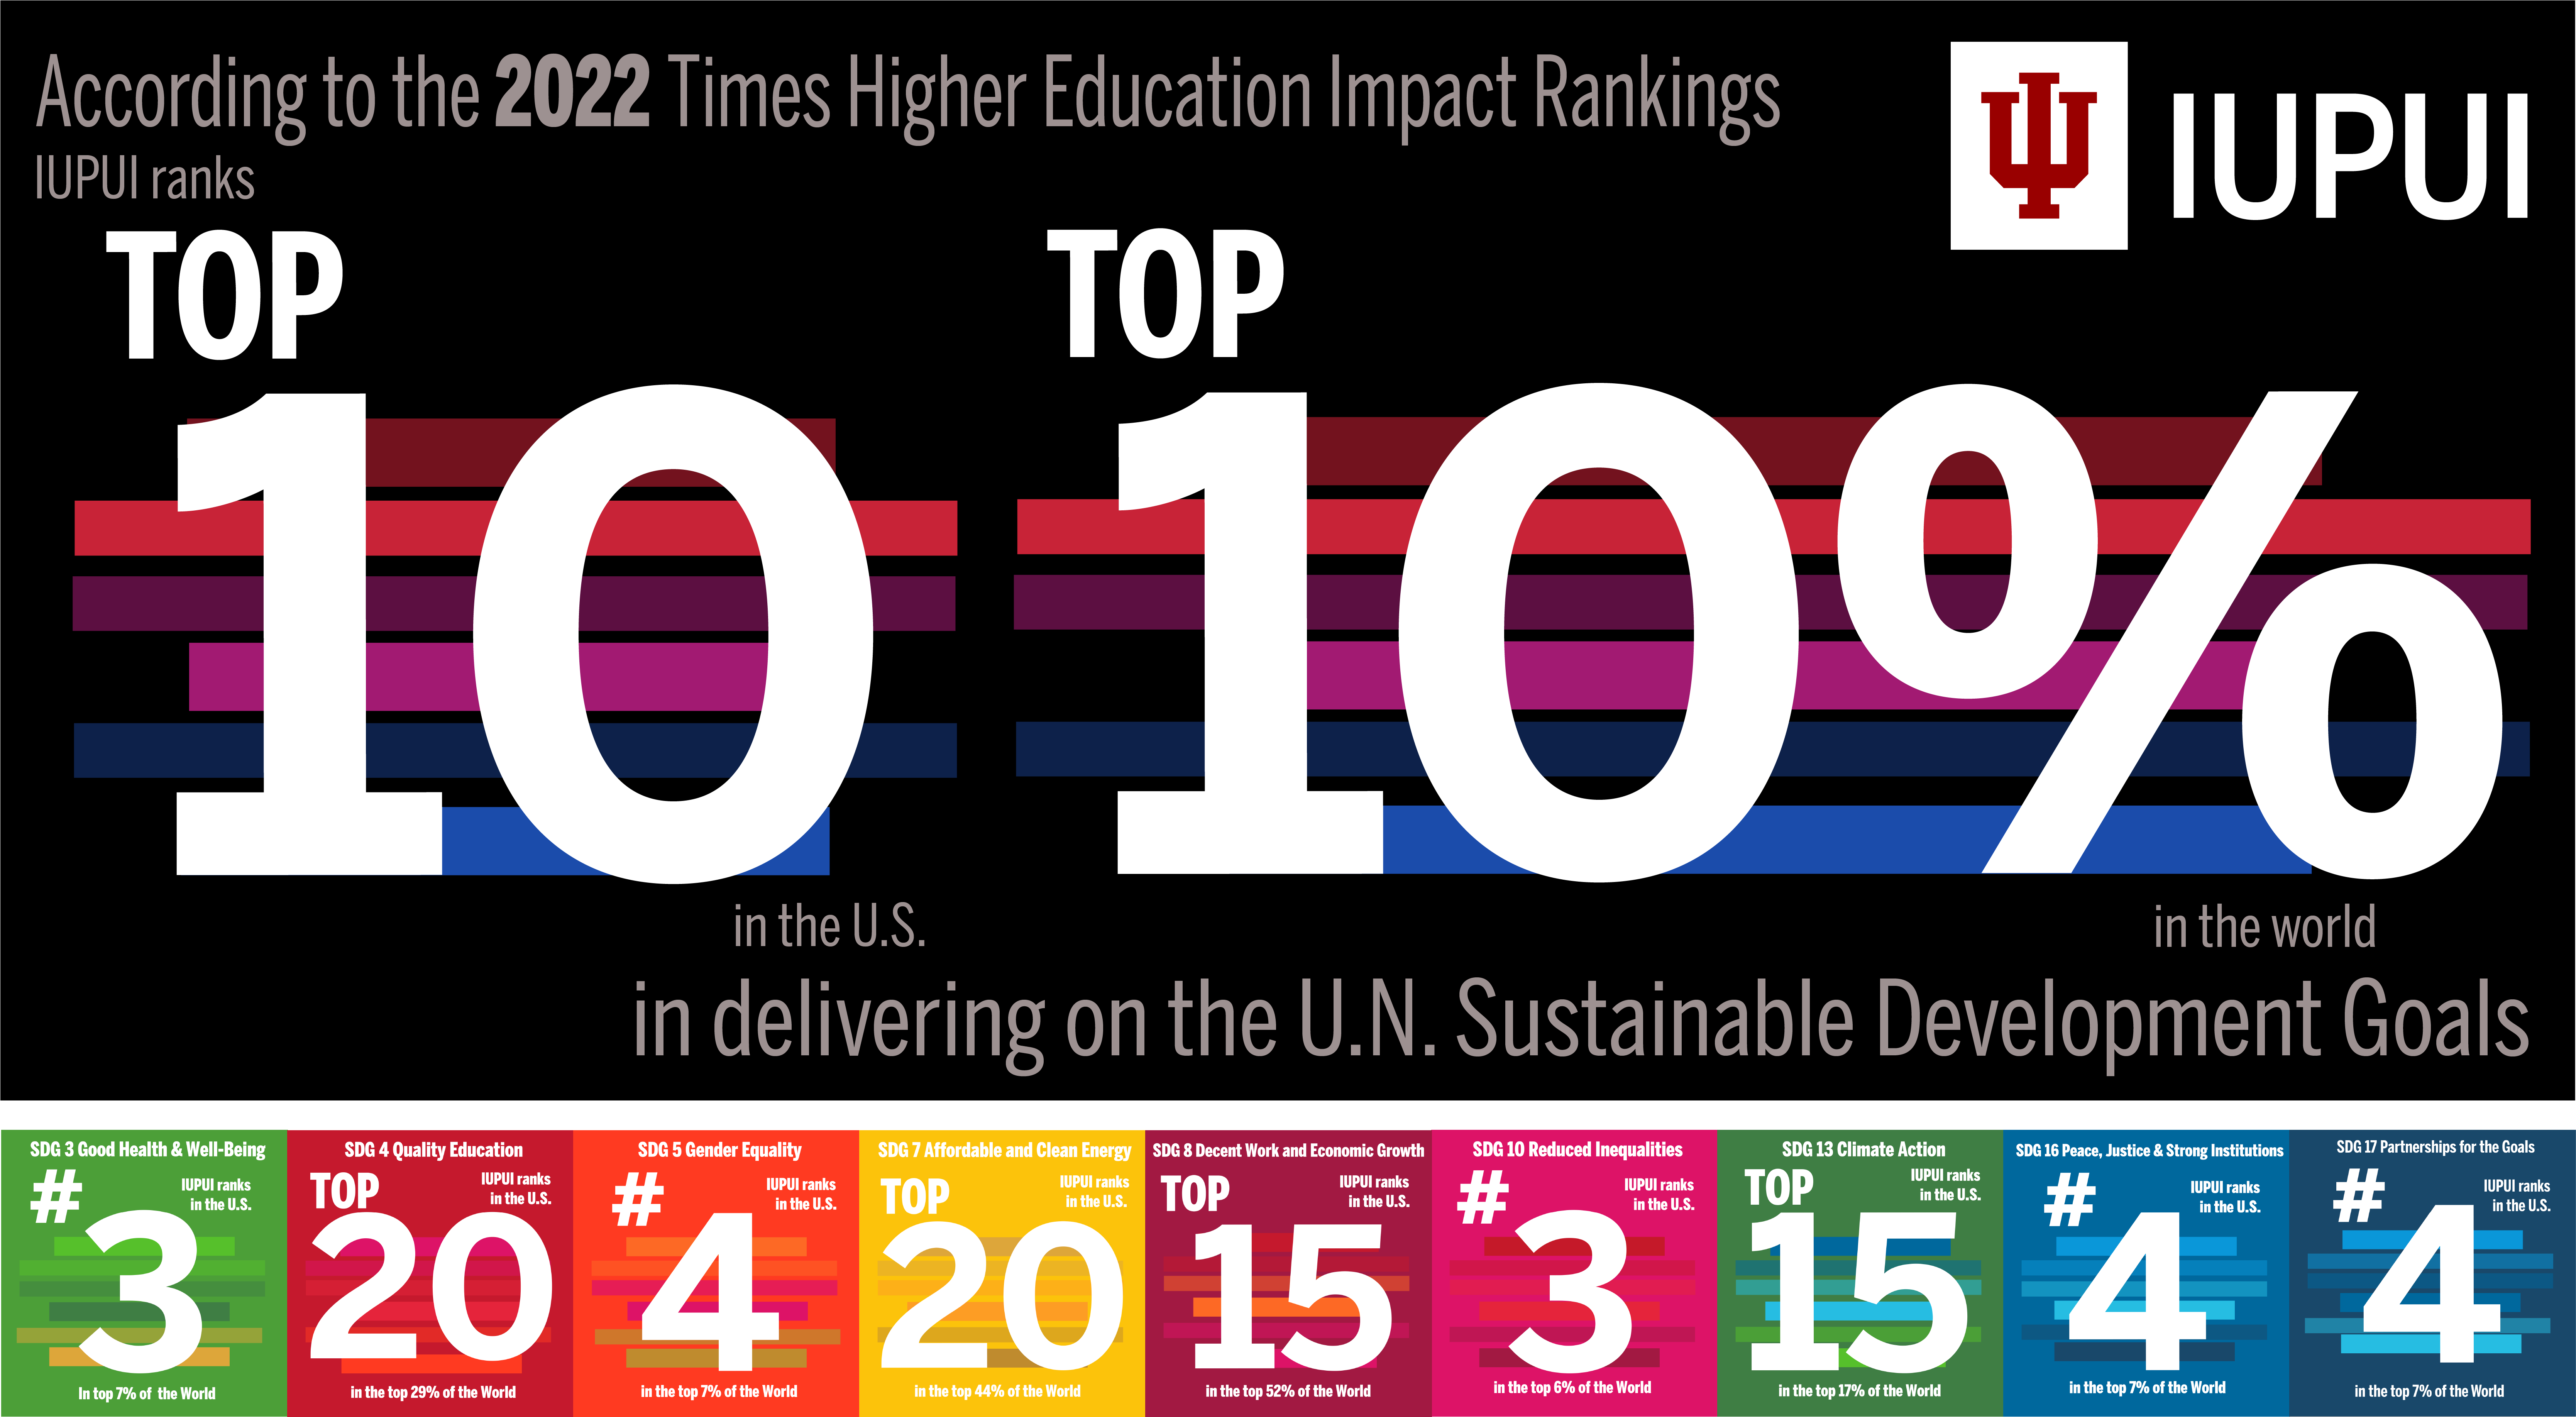 According to the 2022 Times Higher Education Impact Rankings, IUPUI ranks top 10 in the US and top 10 percent in the world in delivering on the U.N. Sustainable Development Goals.